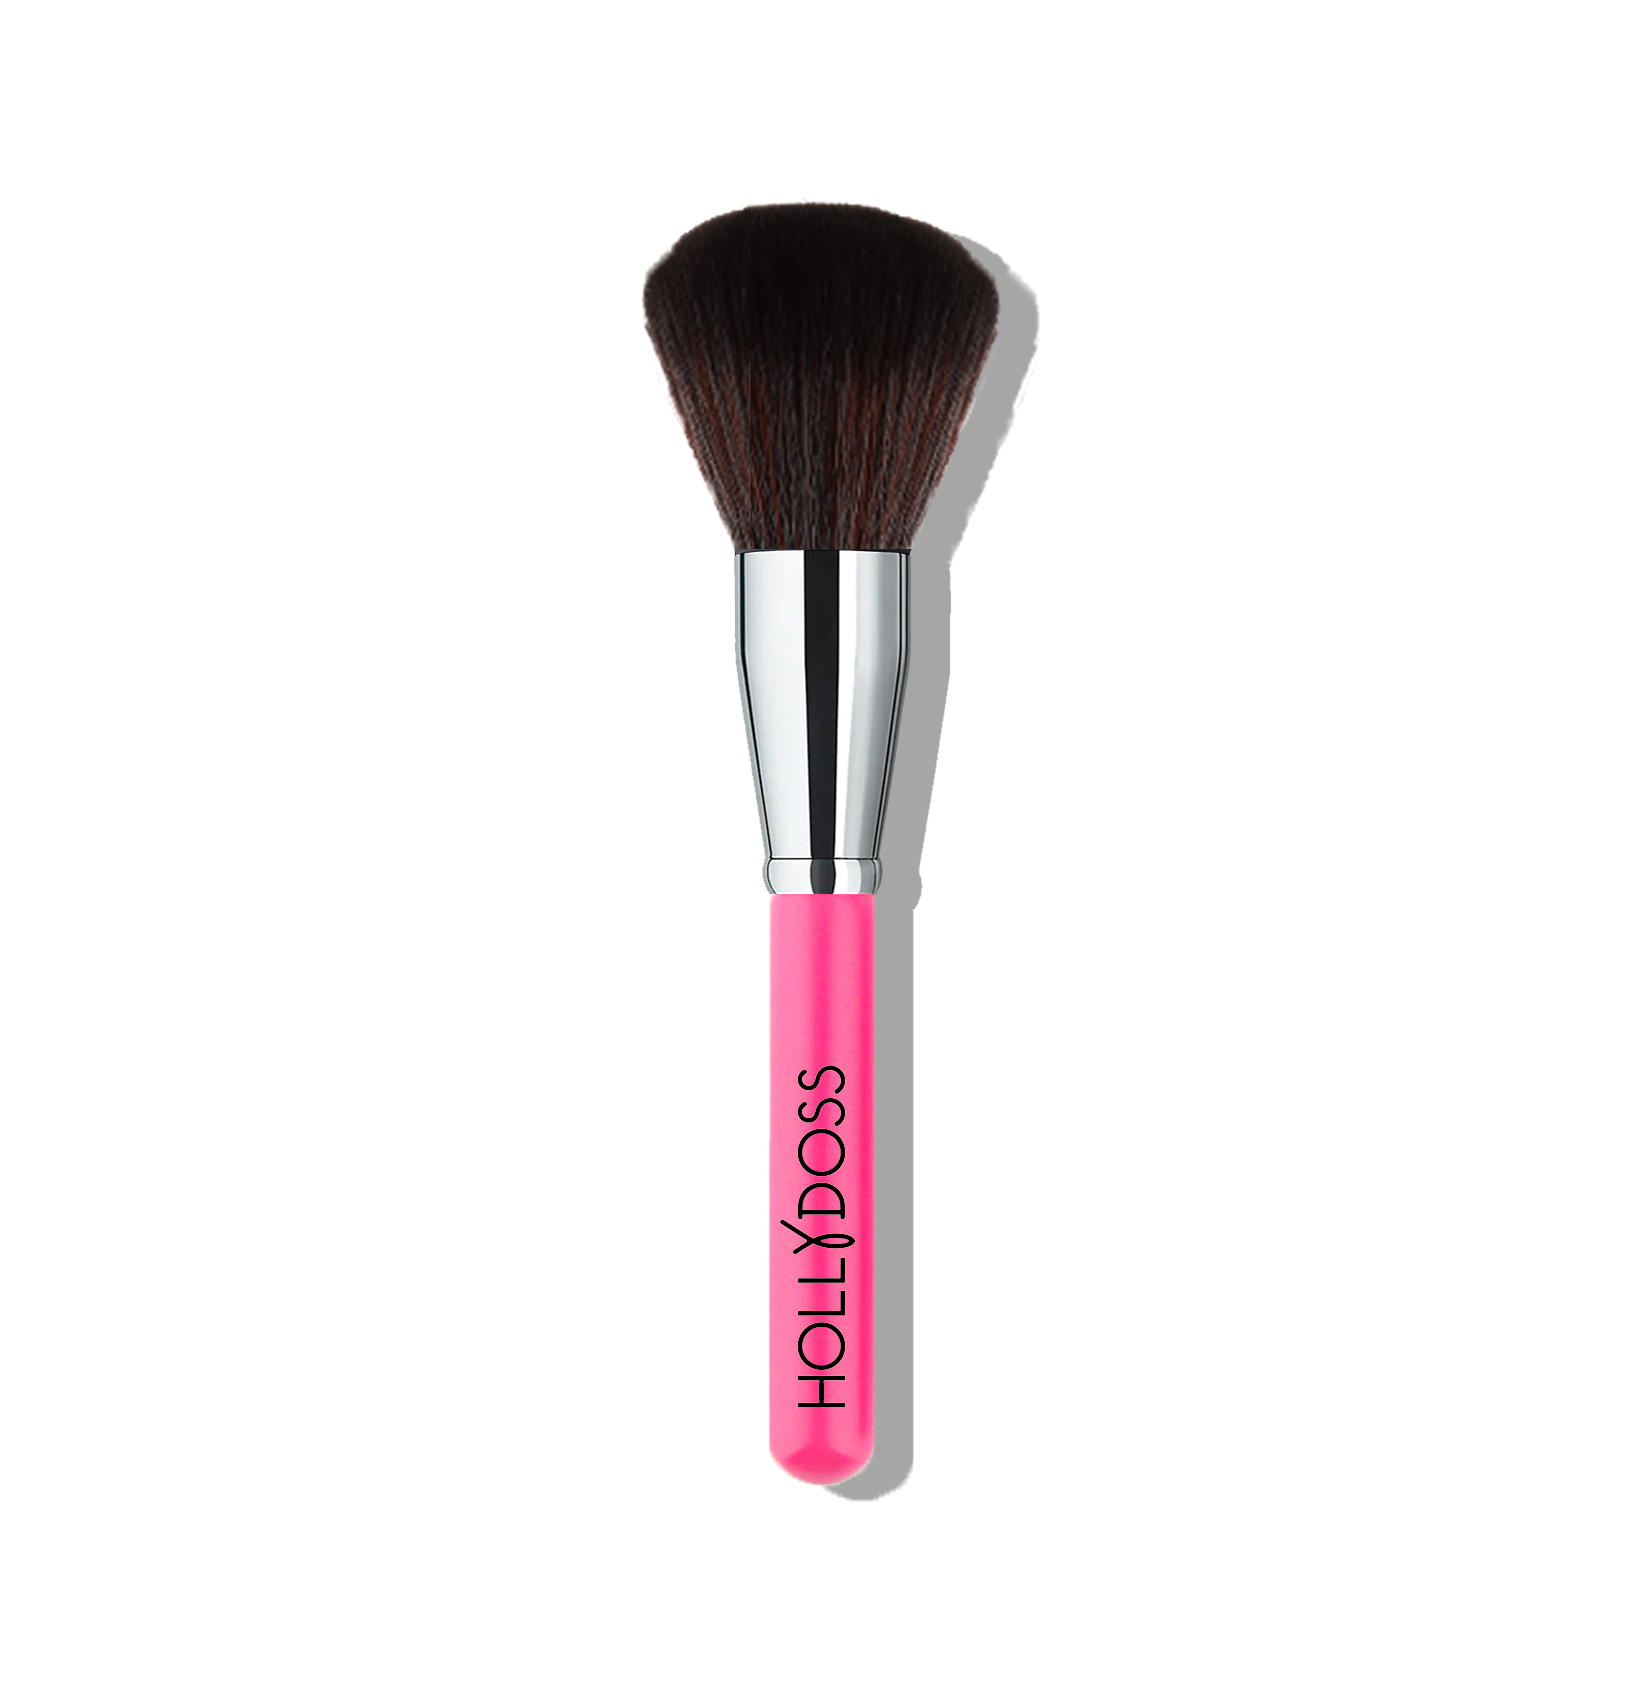 All Over Bronzing Brush - #1 - Holly Doss Official